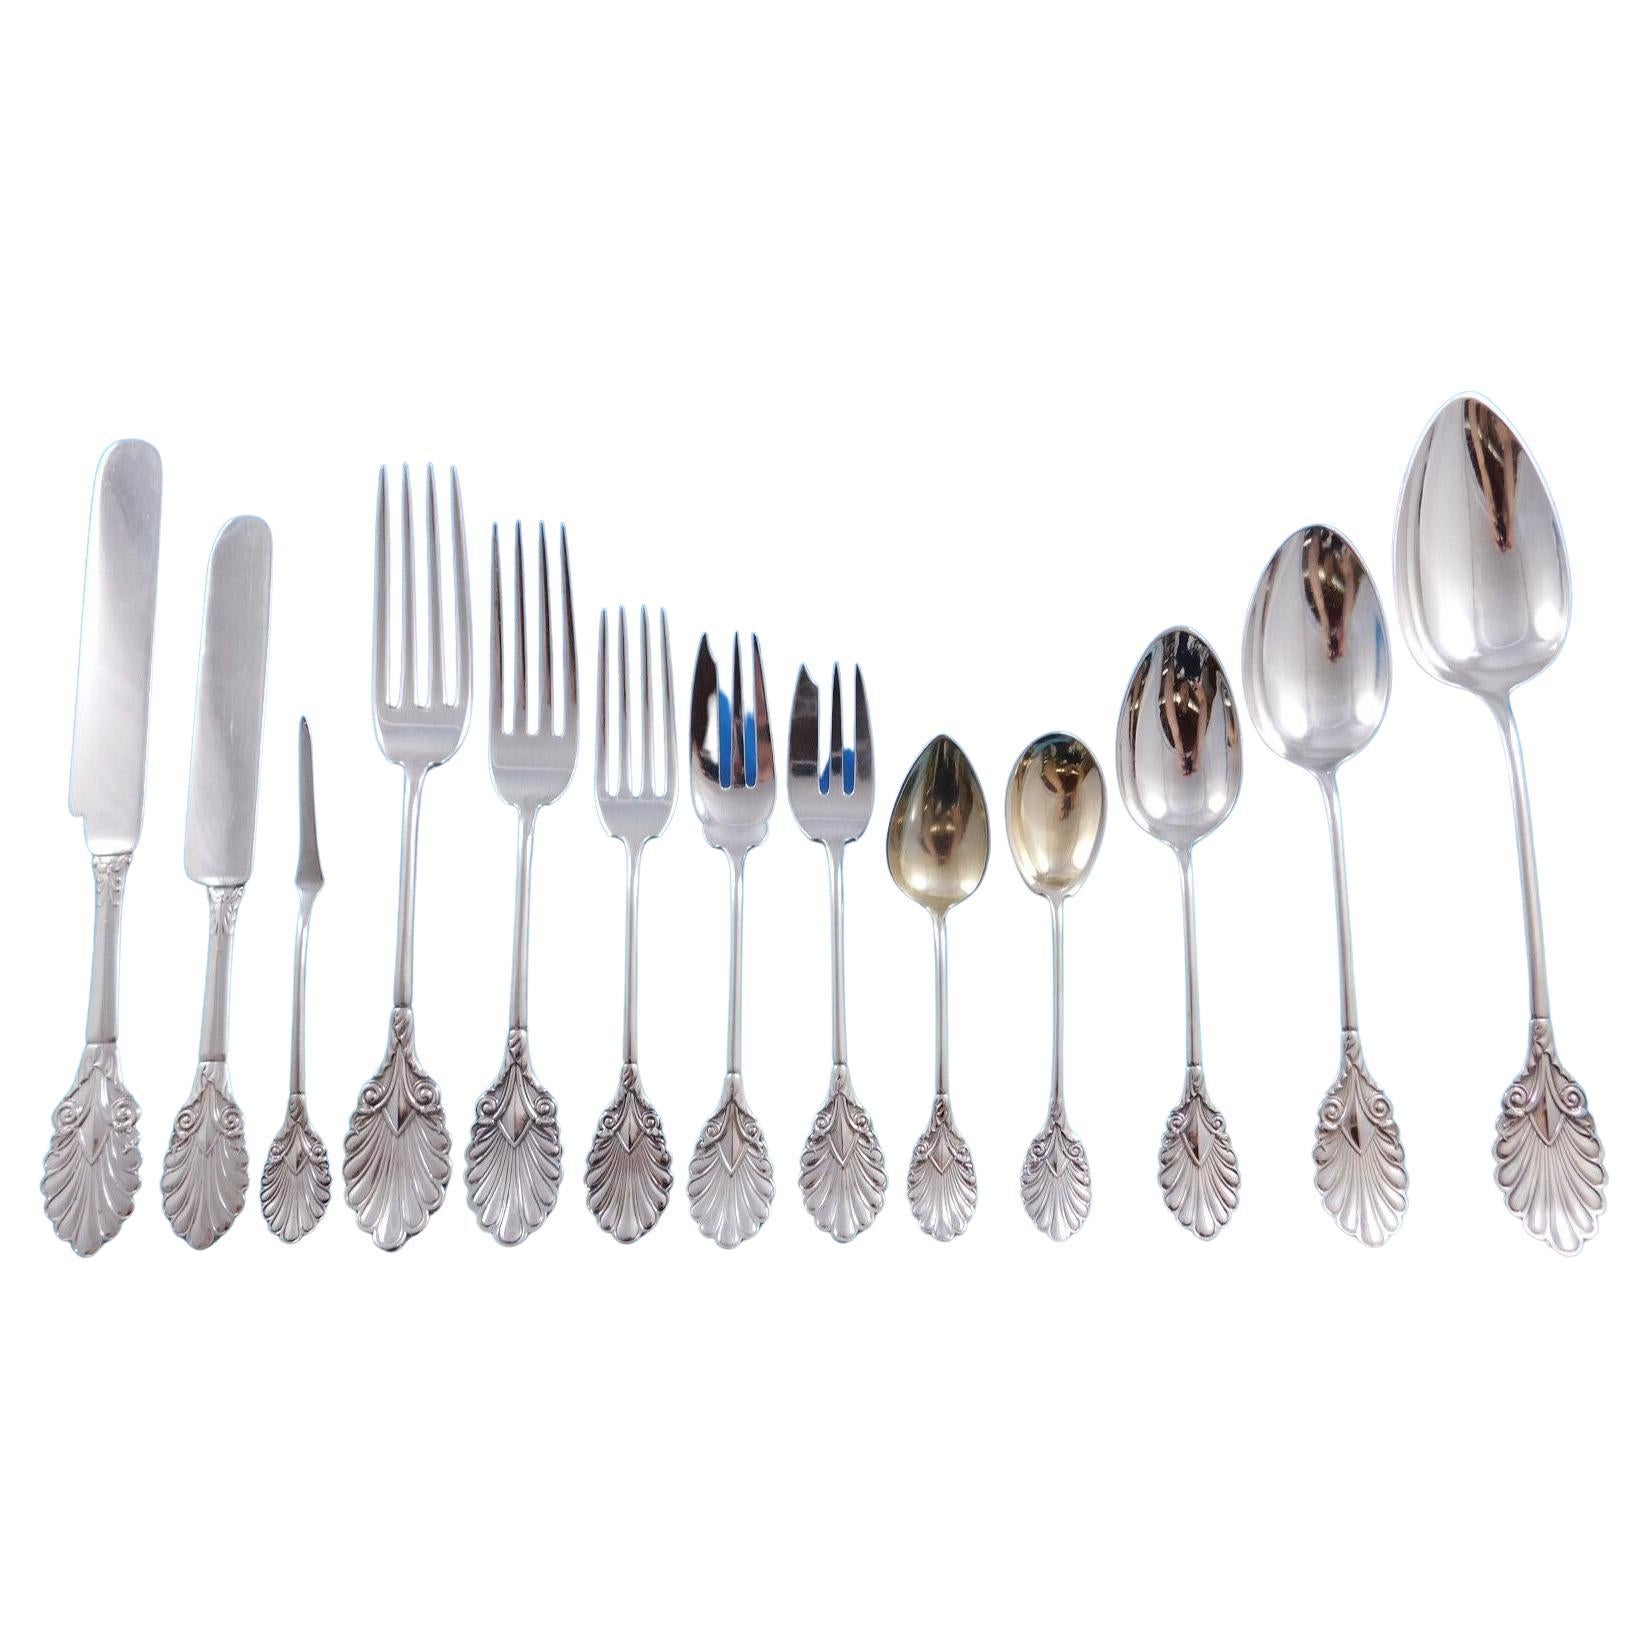 Grecian by Gorham Sterling Silver Flatware Service Rare circa 1861 Early 149 pcs For Sale